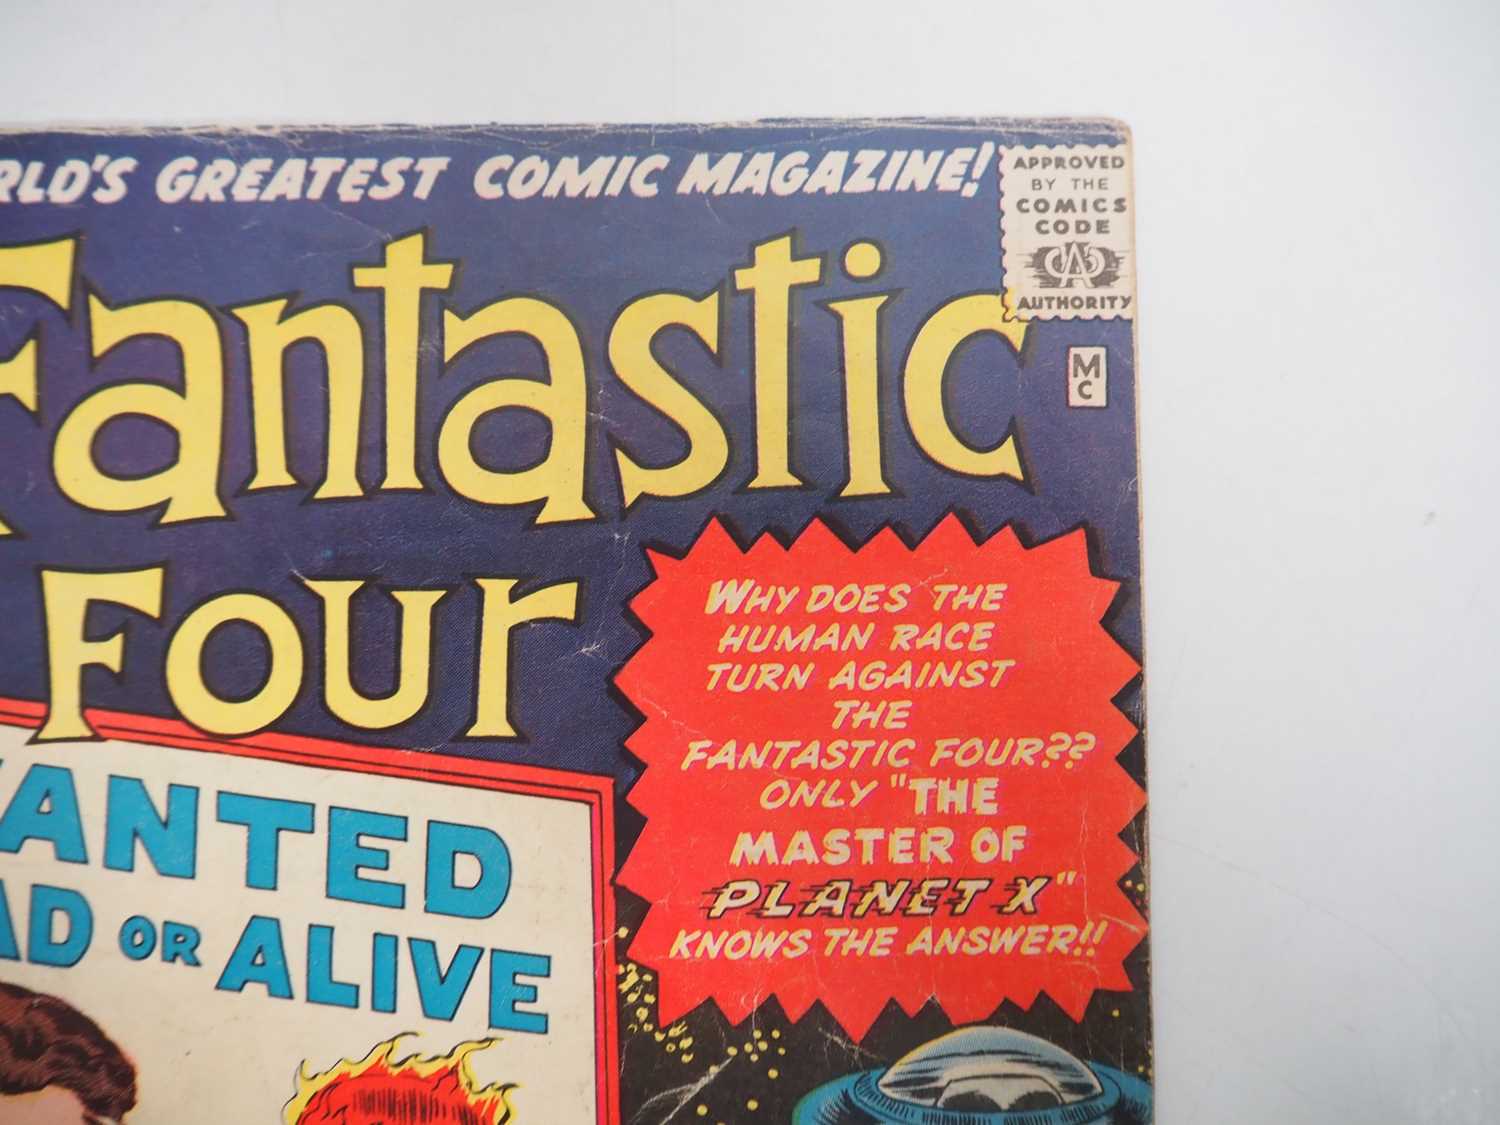 FANTASTIC FOUR #7 (1962 - MARVEL - UK Price Variant) - First appearance of Kurrgo - Jack Kirby cover - Image 3 of 13